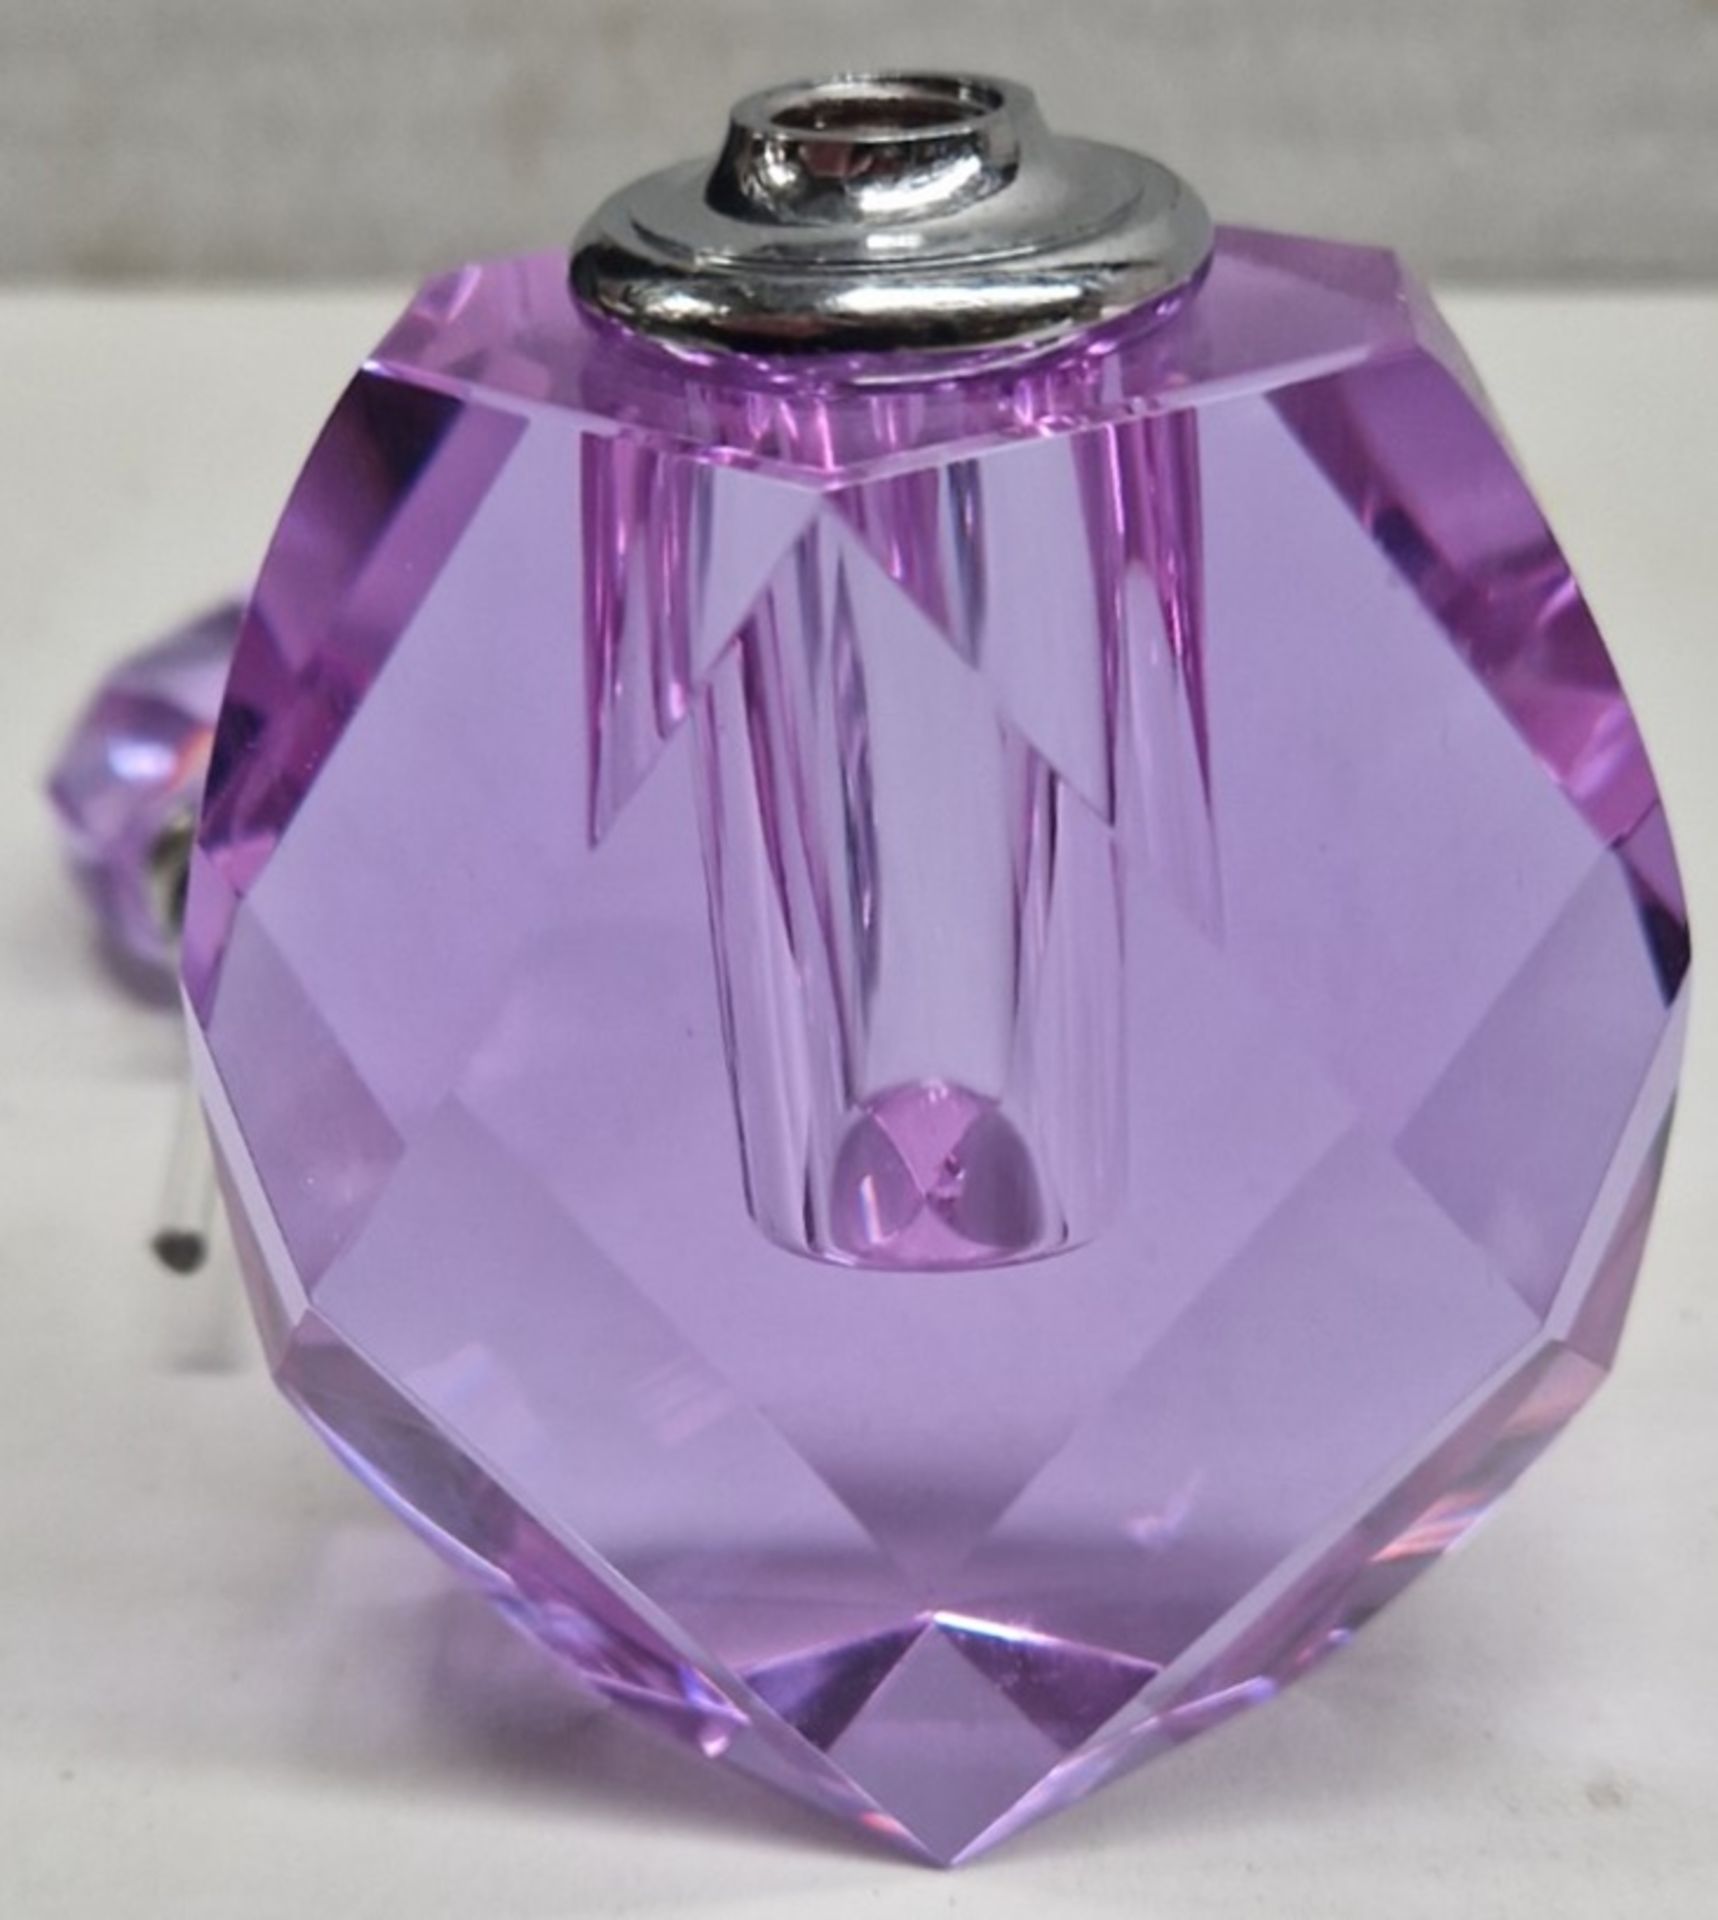 1 x Beautiful Purple Crystal Glass Perfume Bottle With Dauber And Threaded Stopper - Image 5 of 6